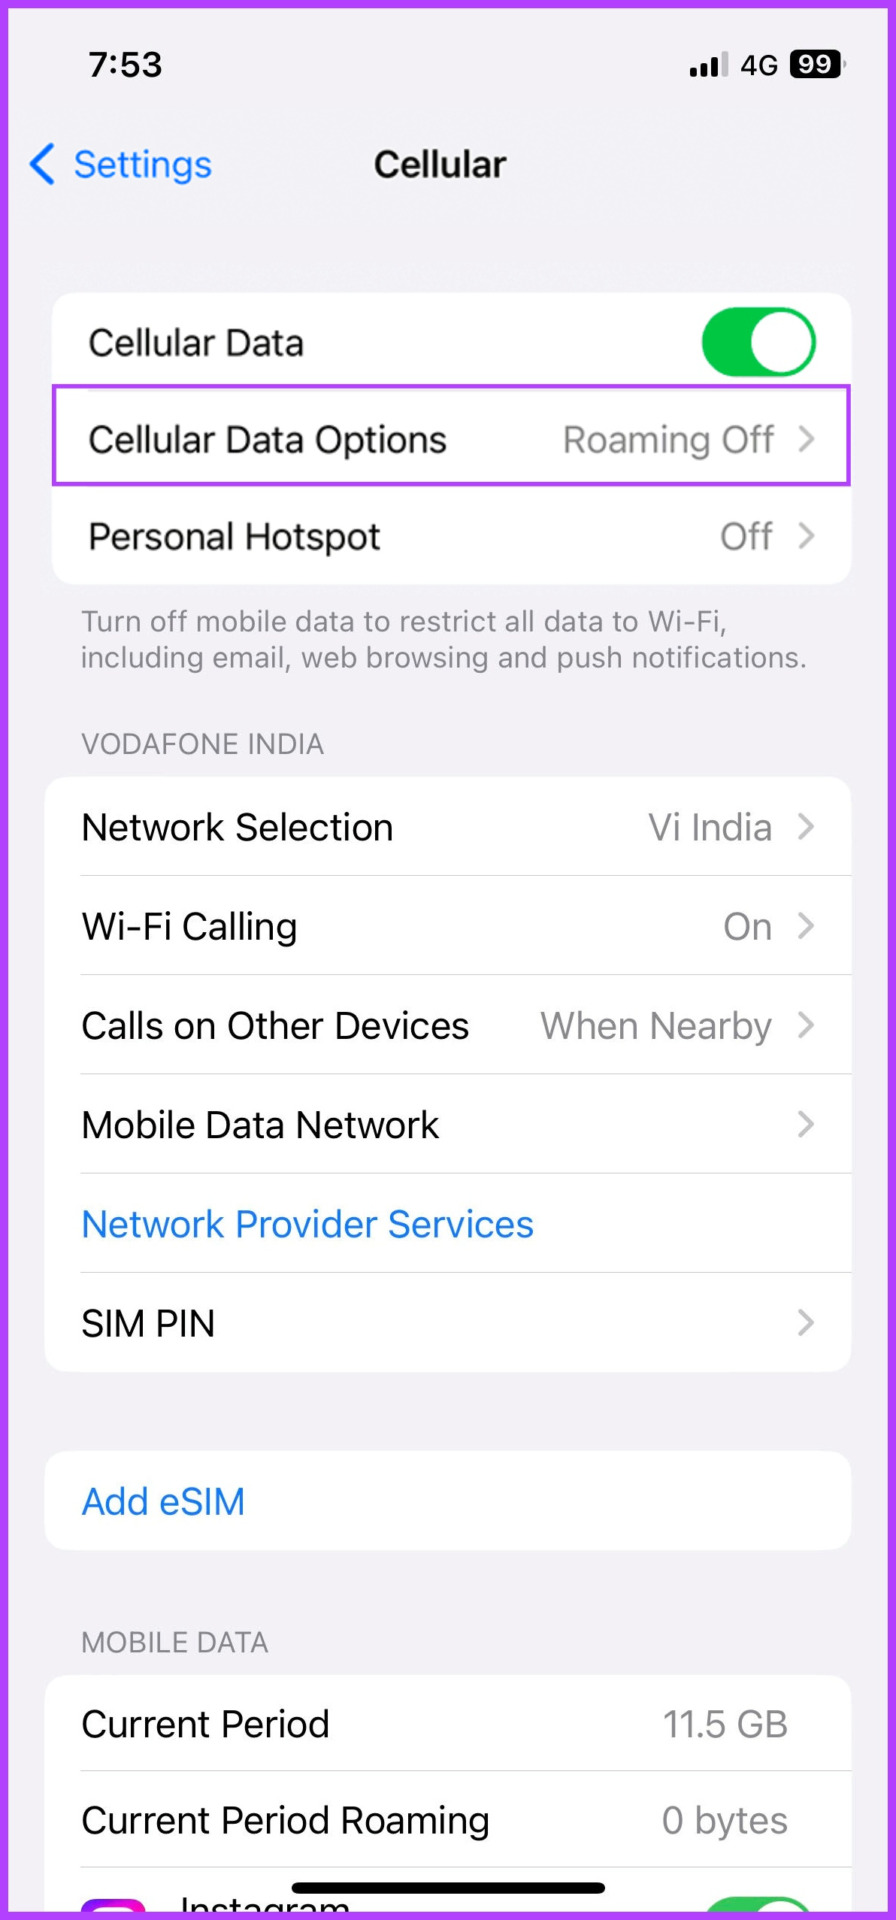 Open Cellular Data Options to turn on or off 5G